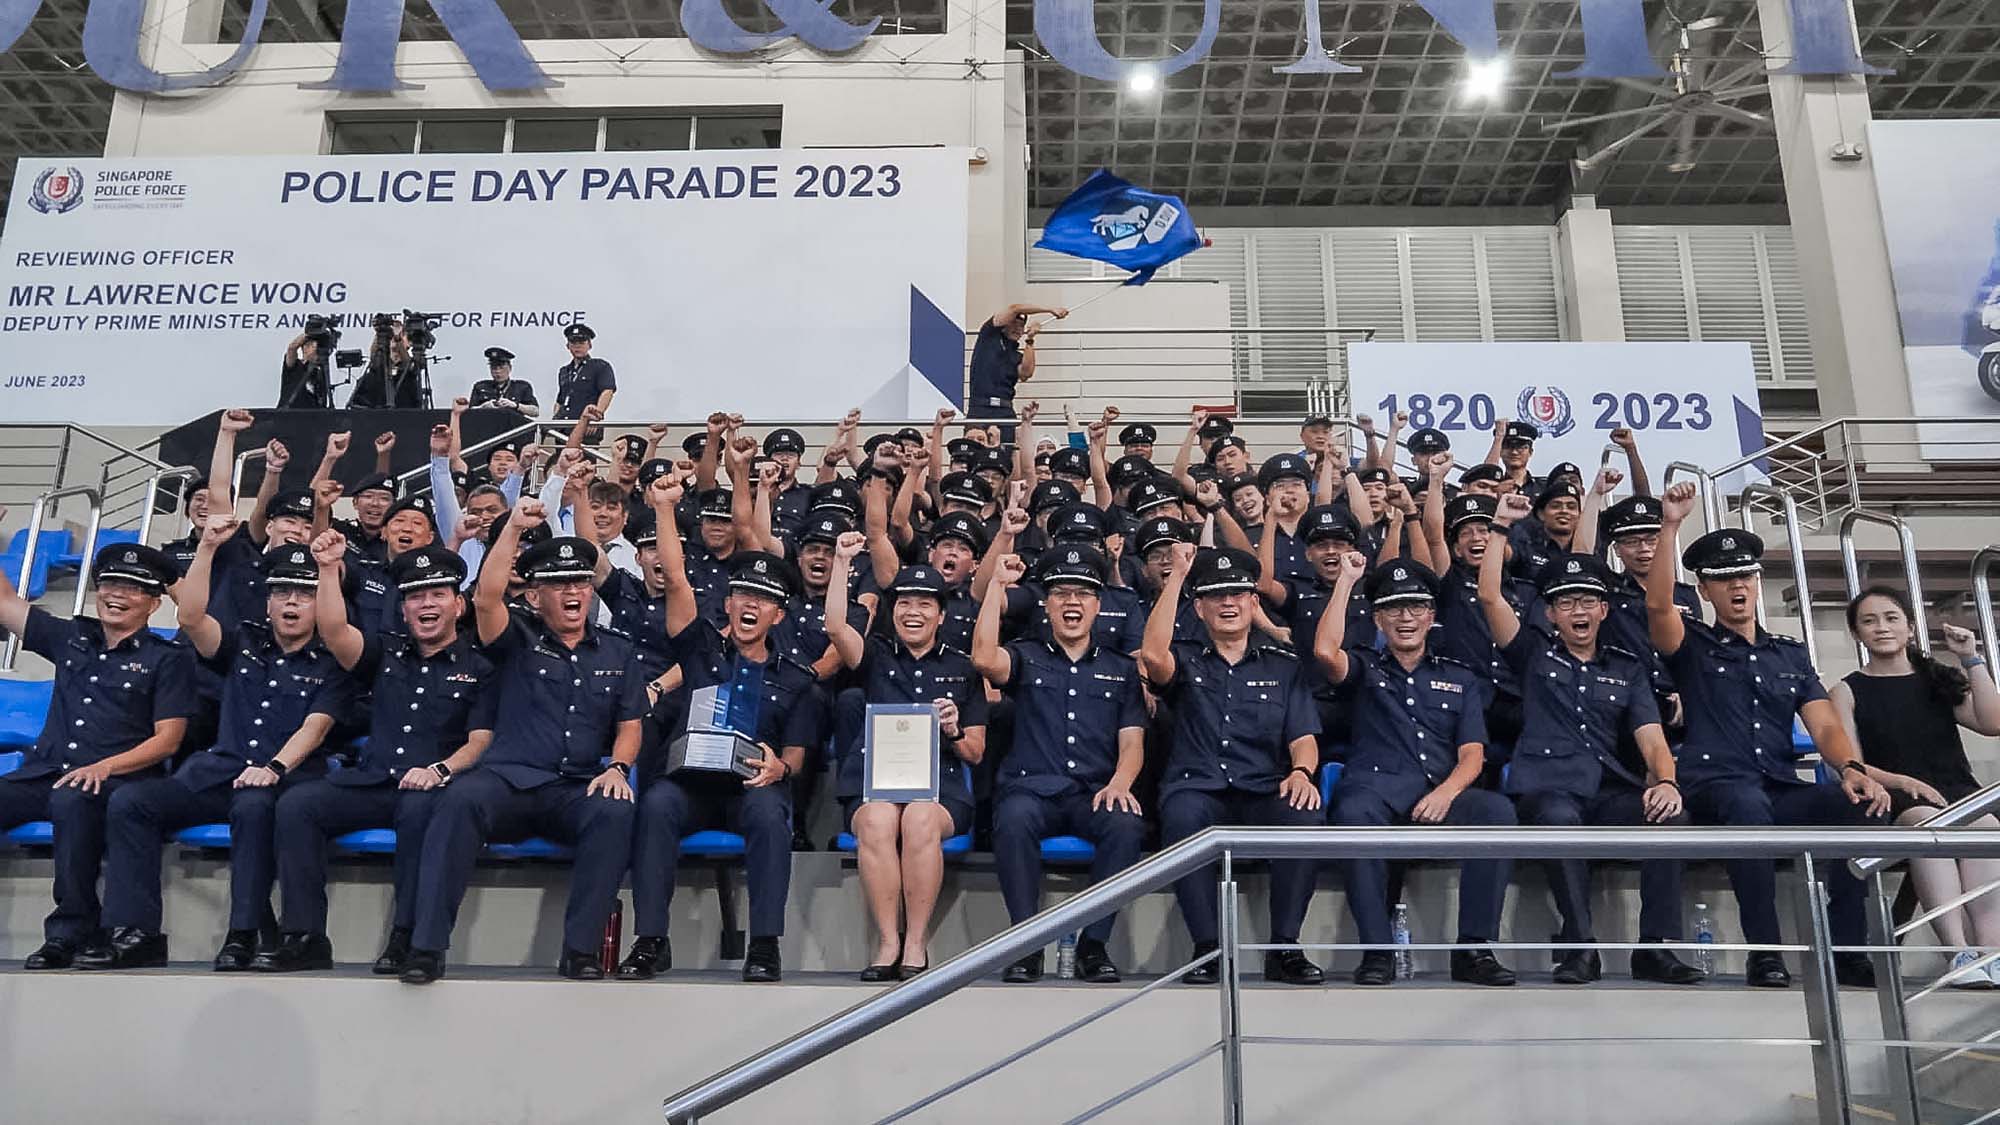 AC Chiu (first row, sixth from the left) led Clementi Police Division to win the Best Land Division award at Police Day Parade 2023. PHOTO: SPF